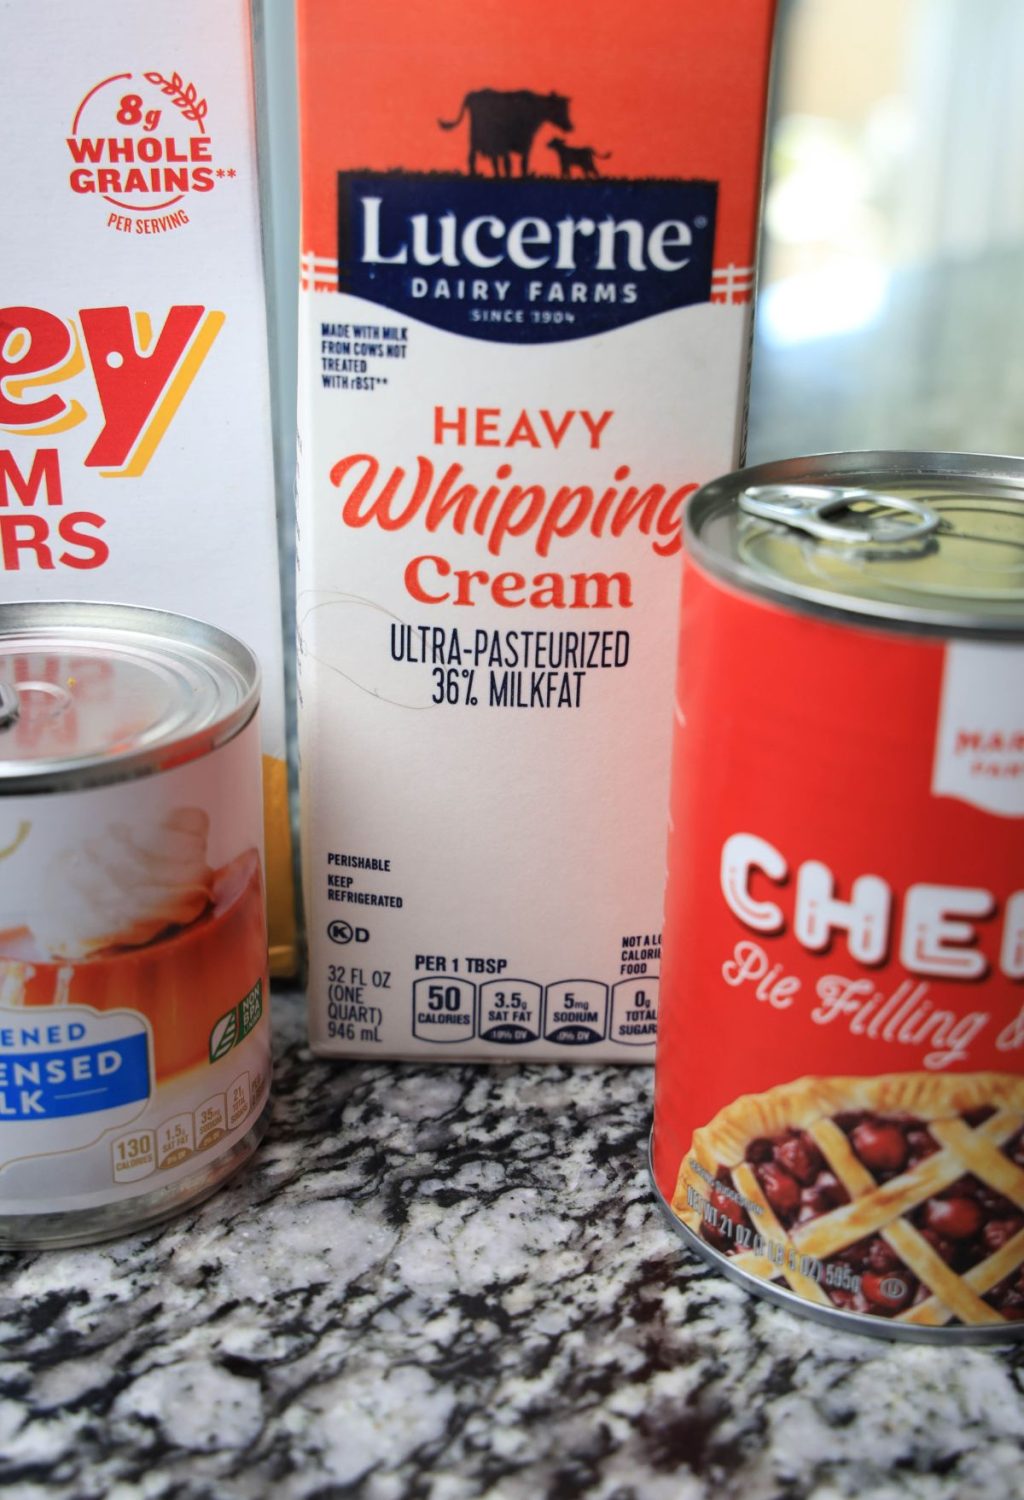 A can of cream cheese, a can of whipping cream, and a can of whipping cream.